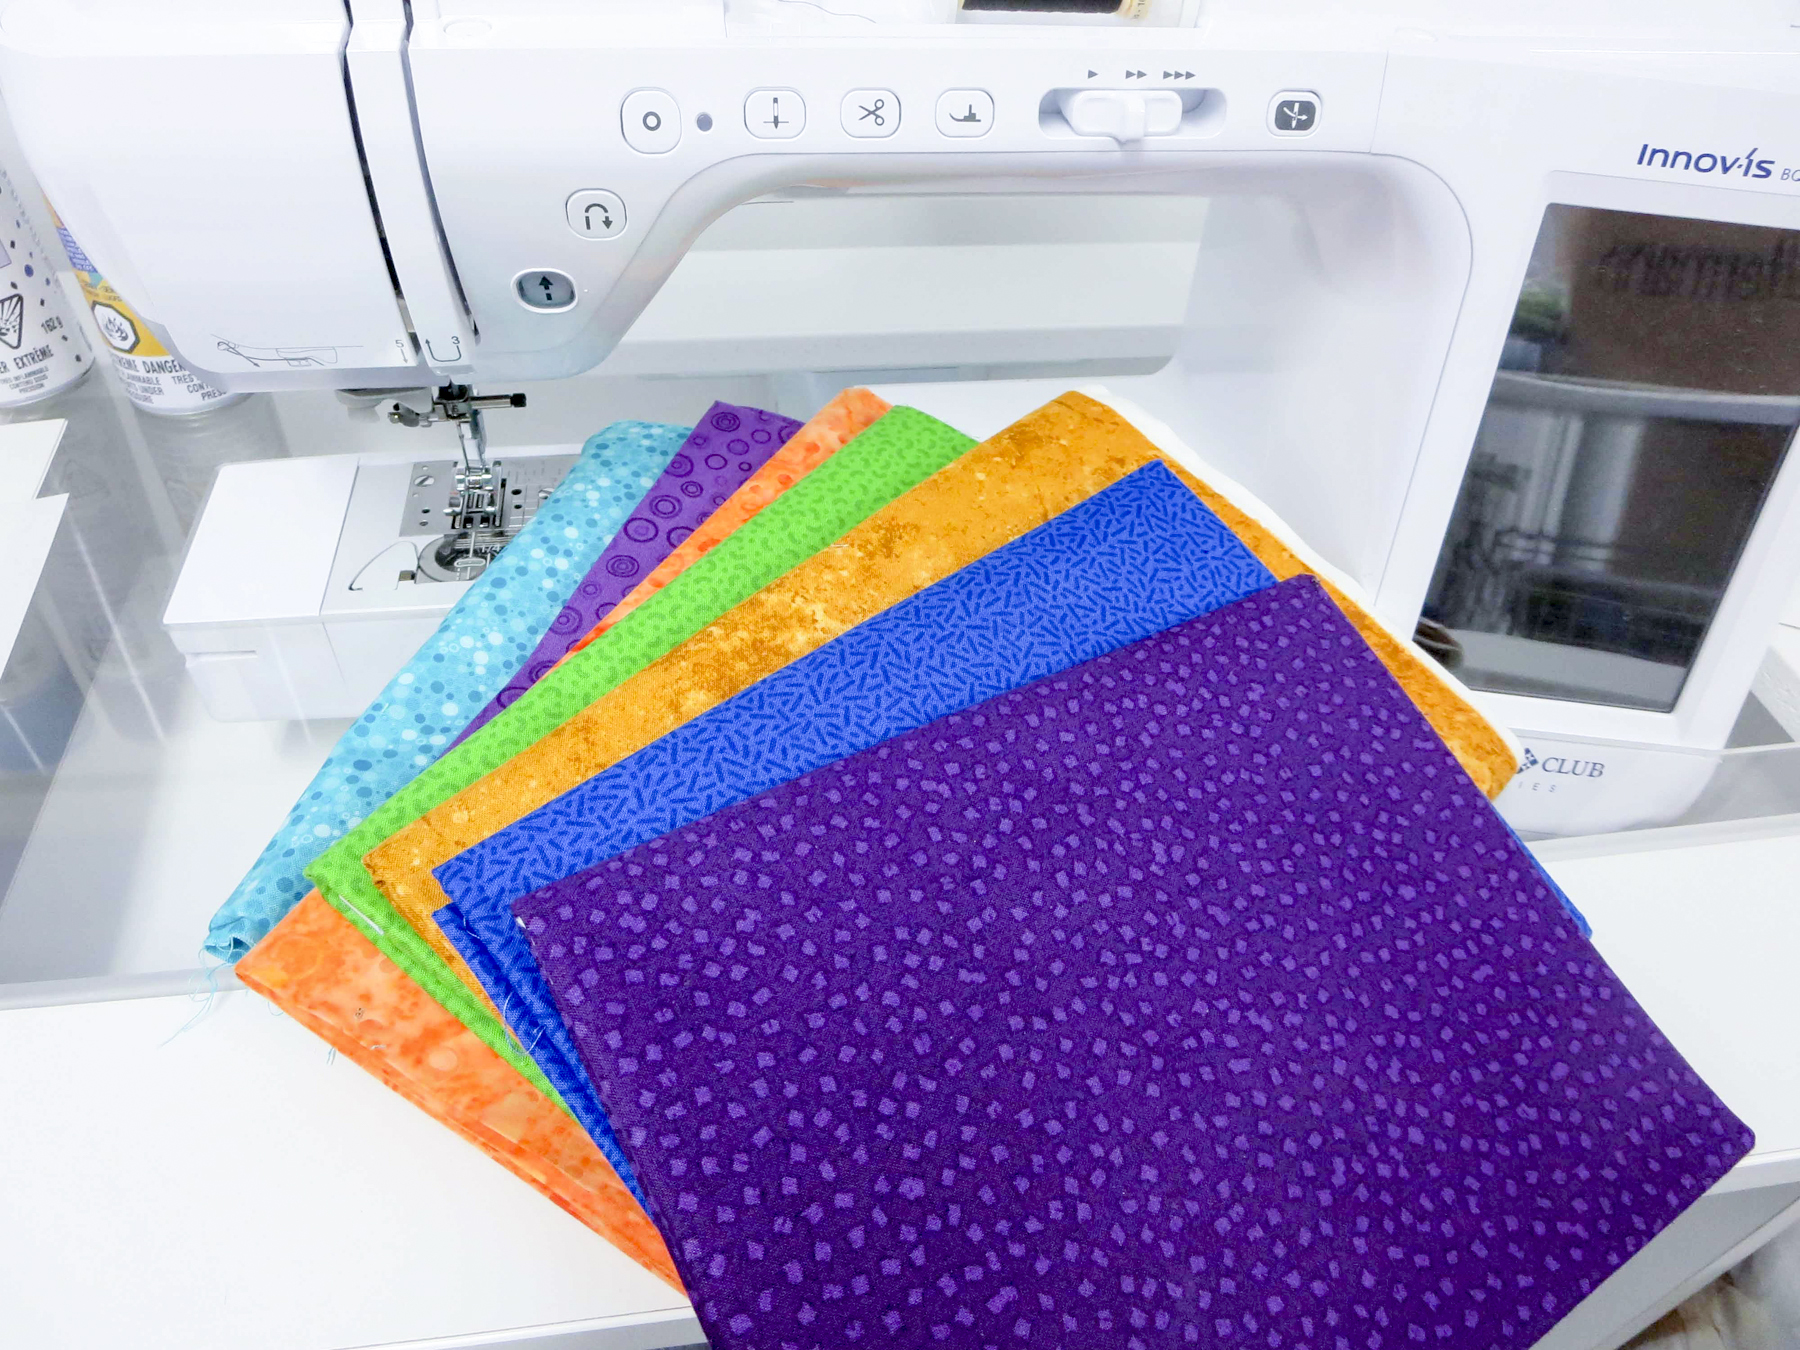 The easy way to applique with HeatnBond fusible web: What works best -  QUILTsocial